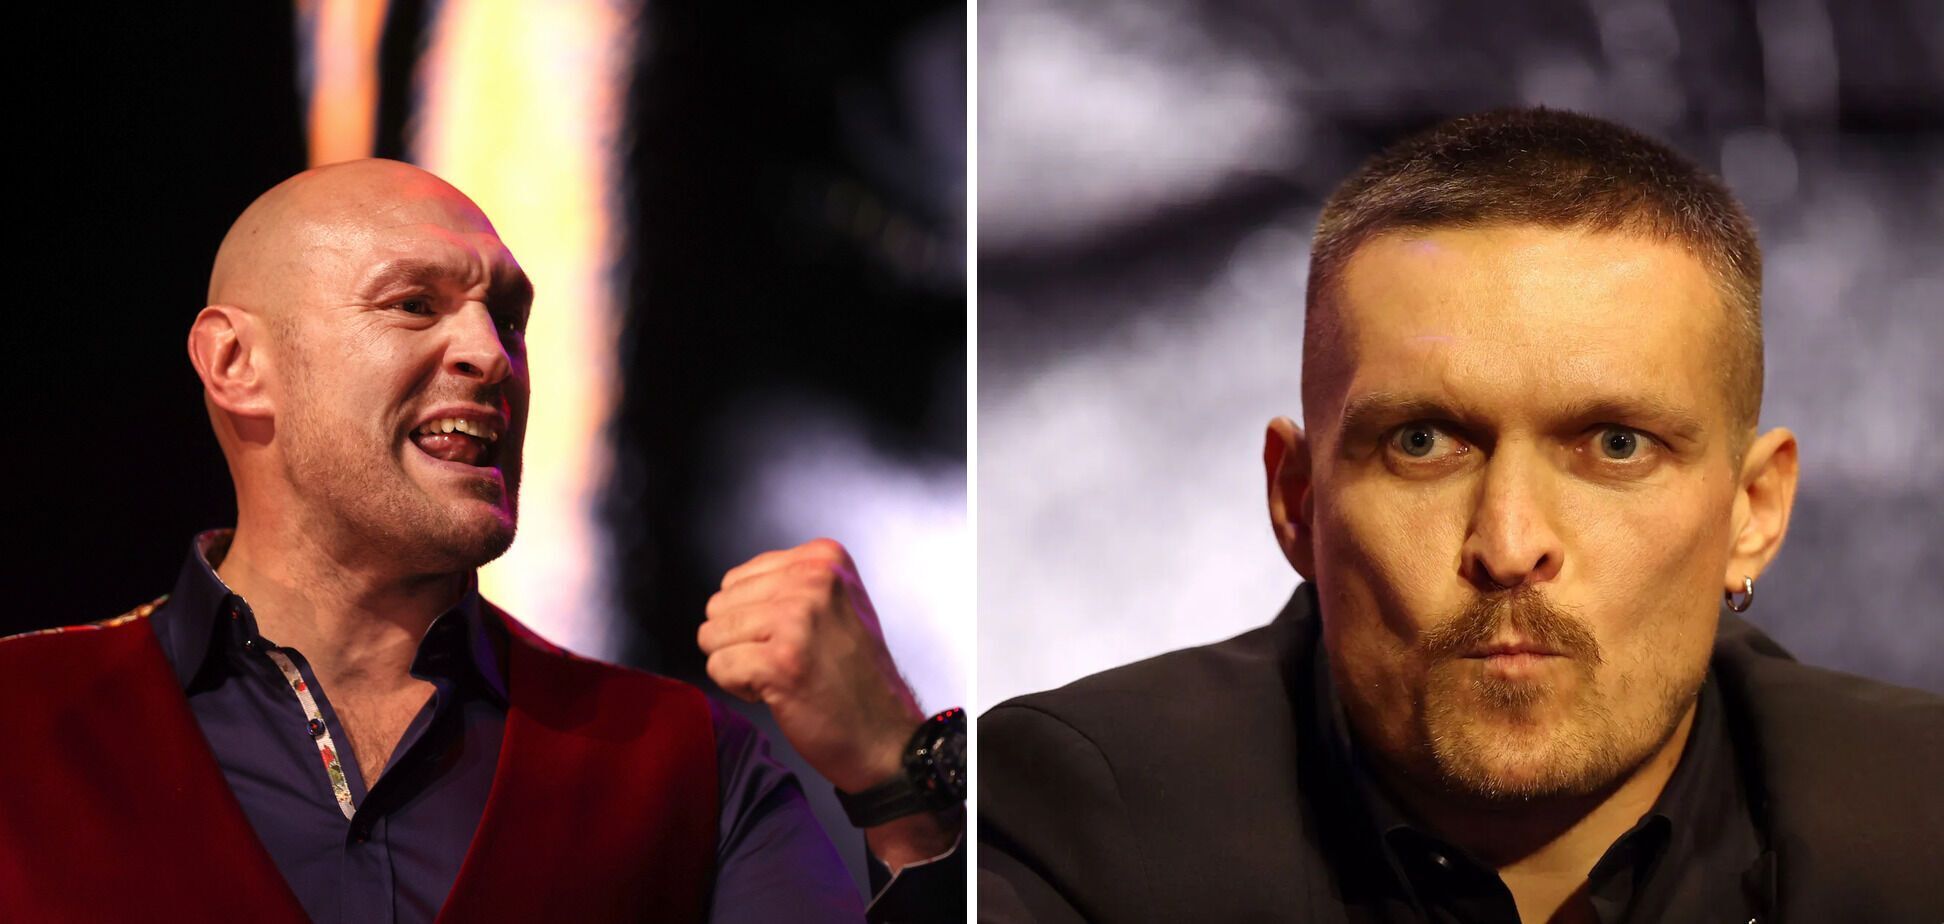 The organizers of the Usyk-Fury fight have made a new condition for boxers to guarantee the fight on May 18